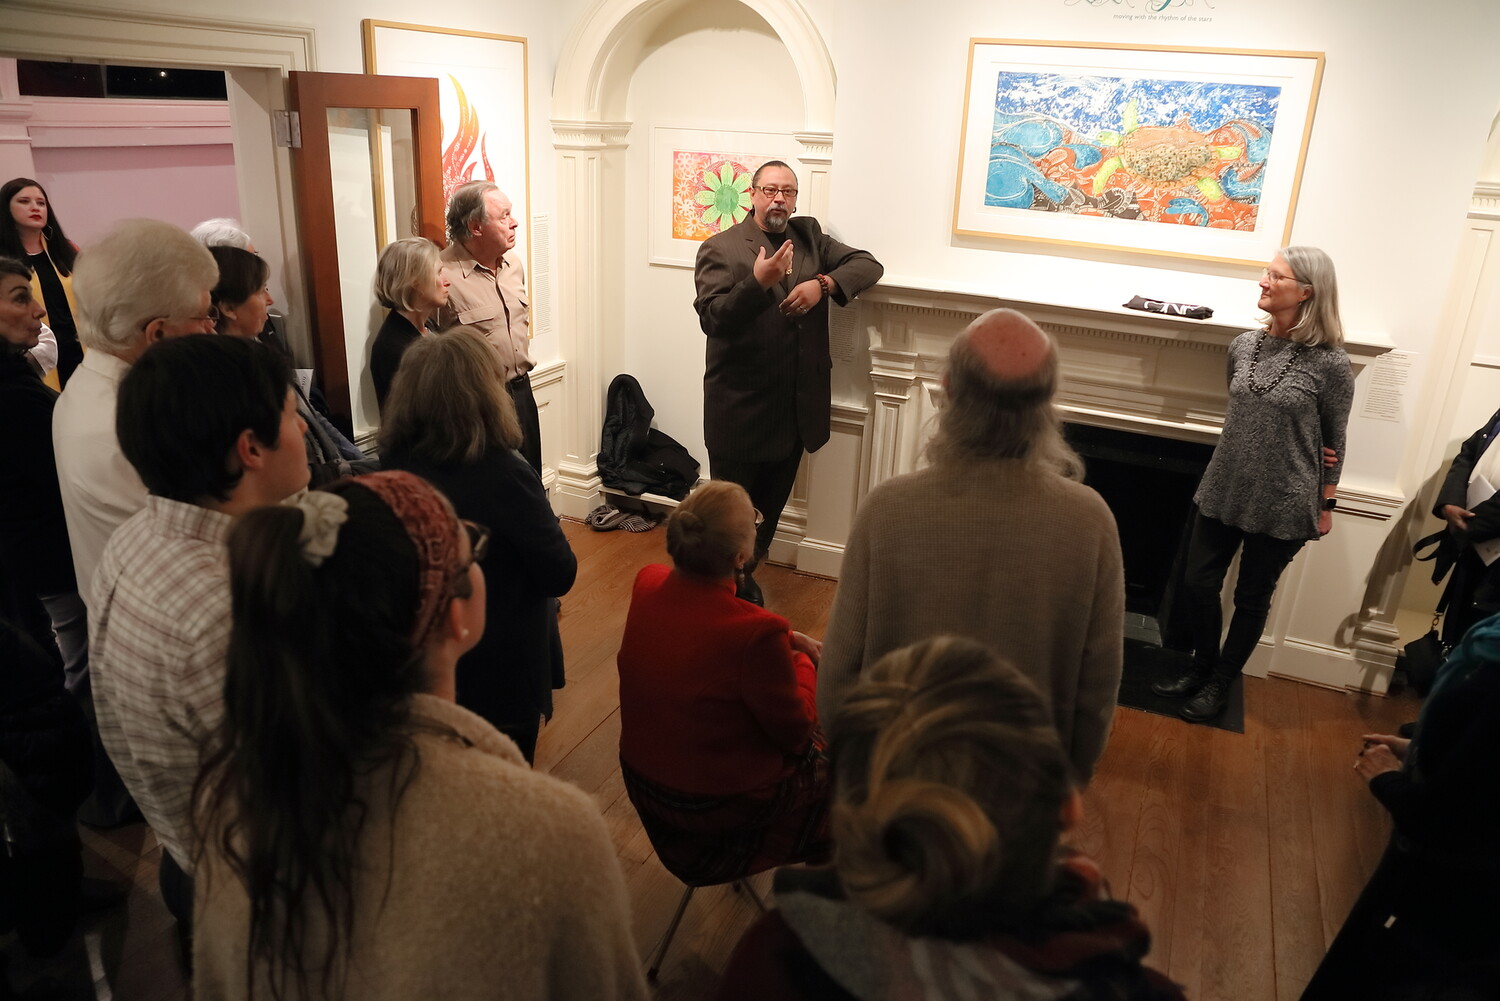 Torres Strait Islander artist Brian Robinson discussing his work at the opening reception of the exhibition Tithuyil: Moving with the Rhythm of the Stars at Kluge-Ruhe in February. Photo by Tom Cogill